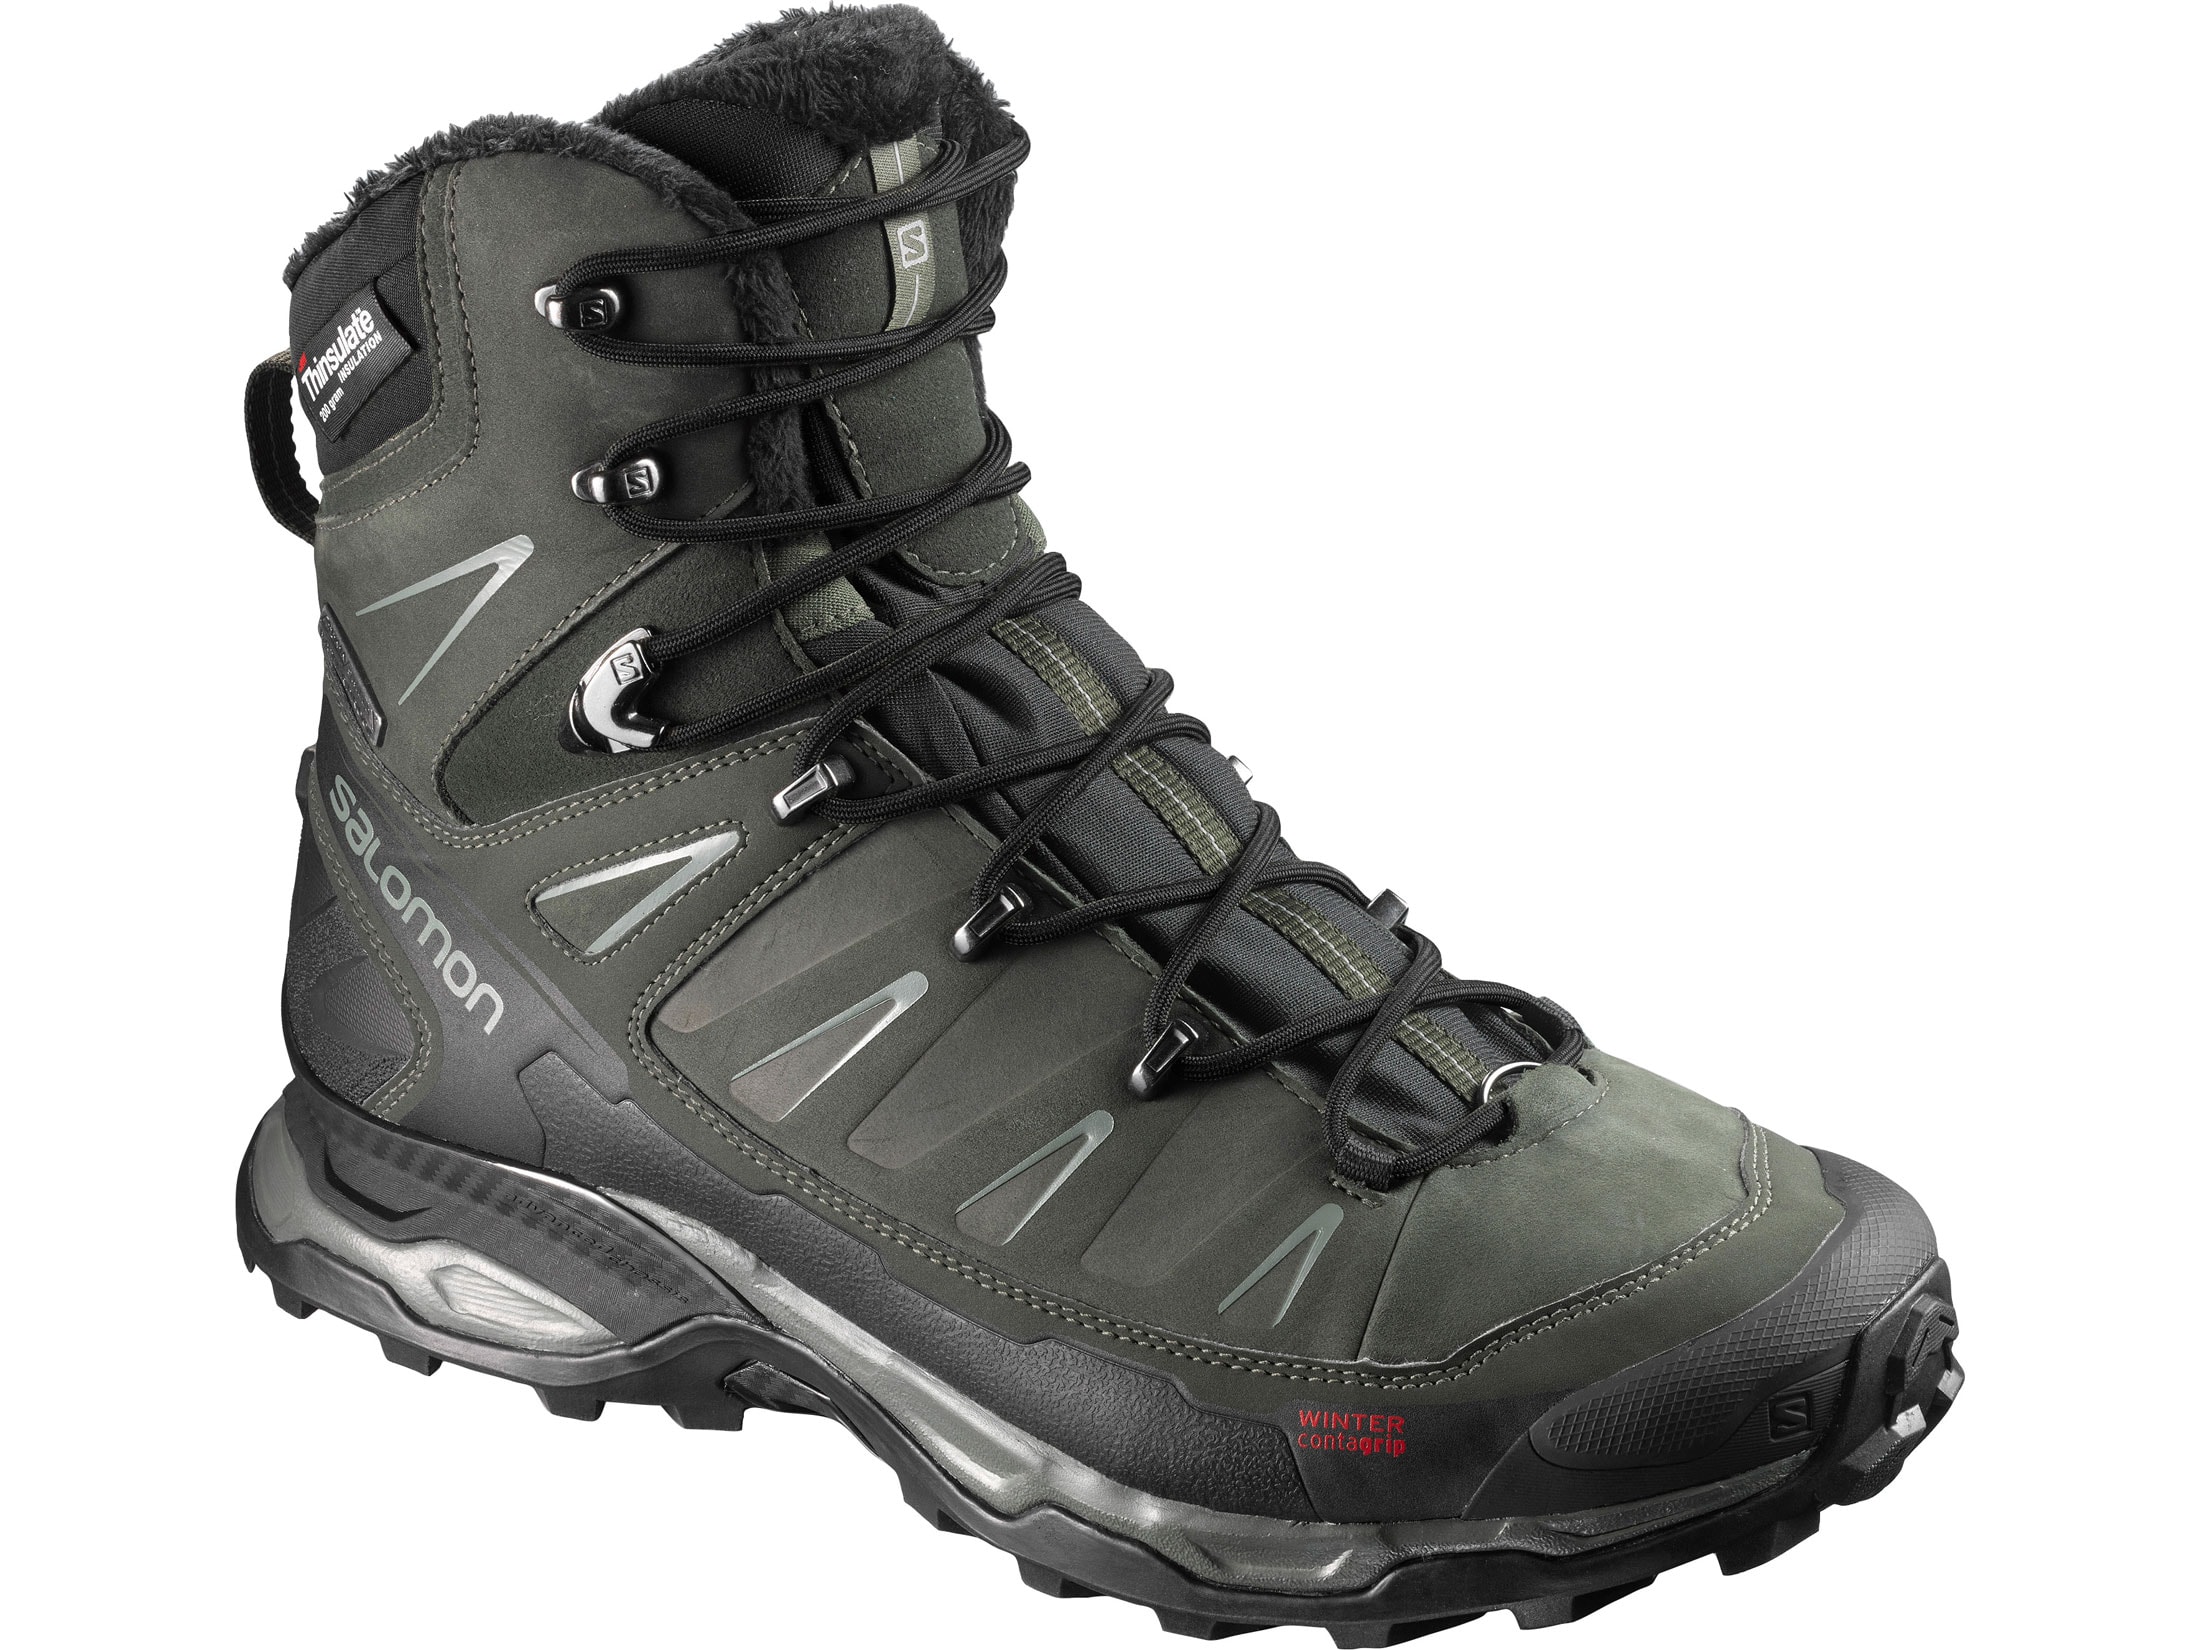 Salomon X Ultra Winter CS 8 Hiking Boots Synthetic Leather